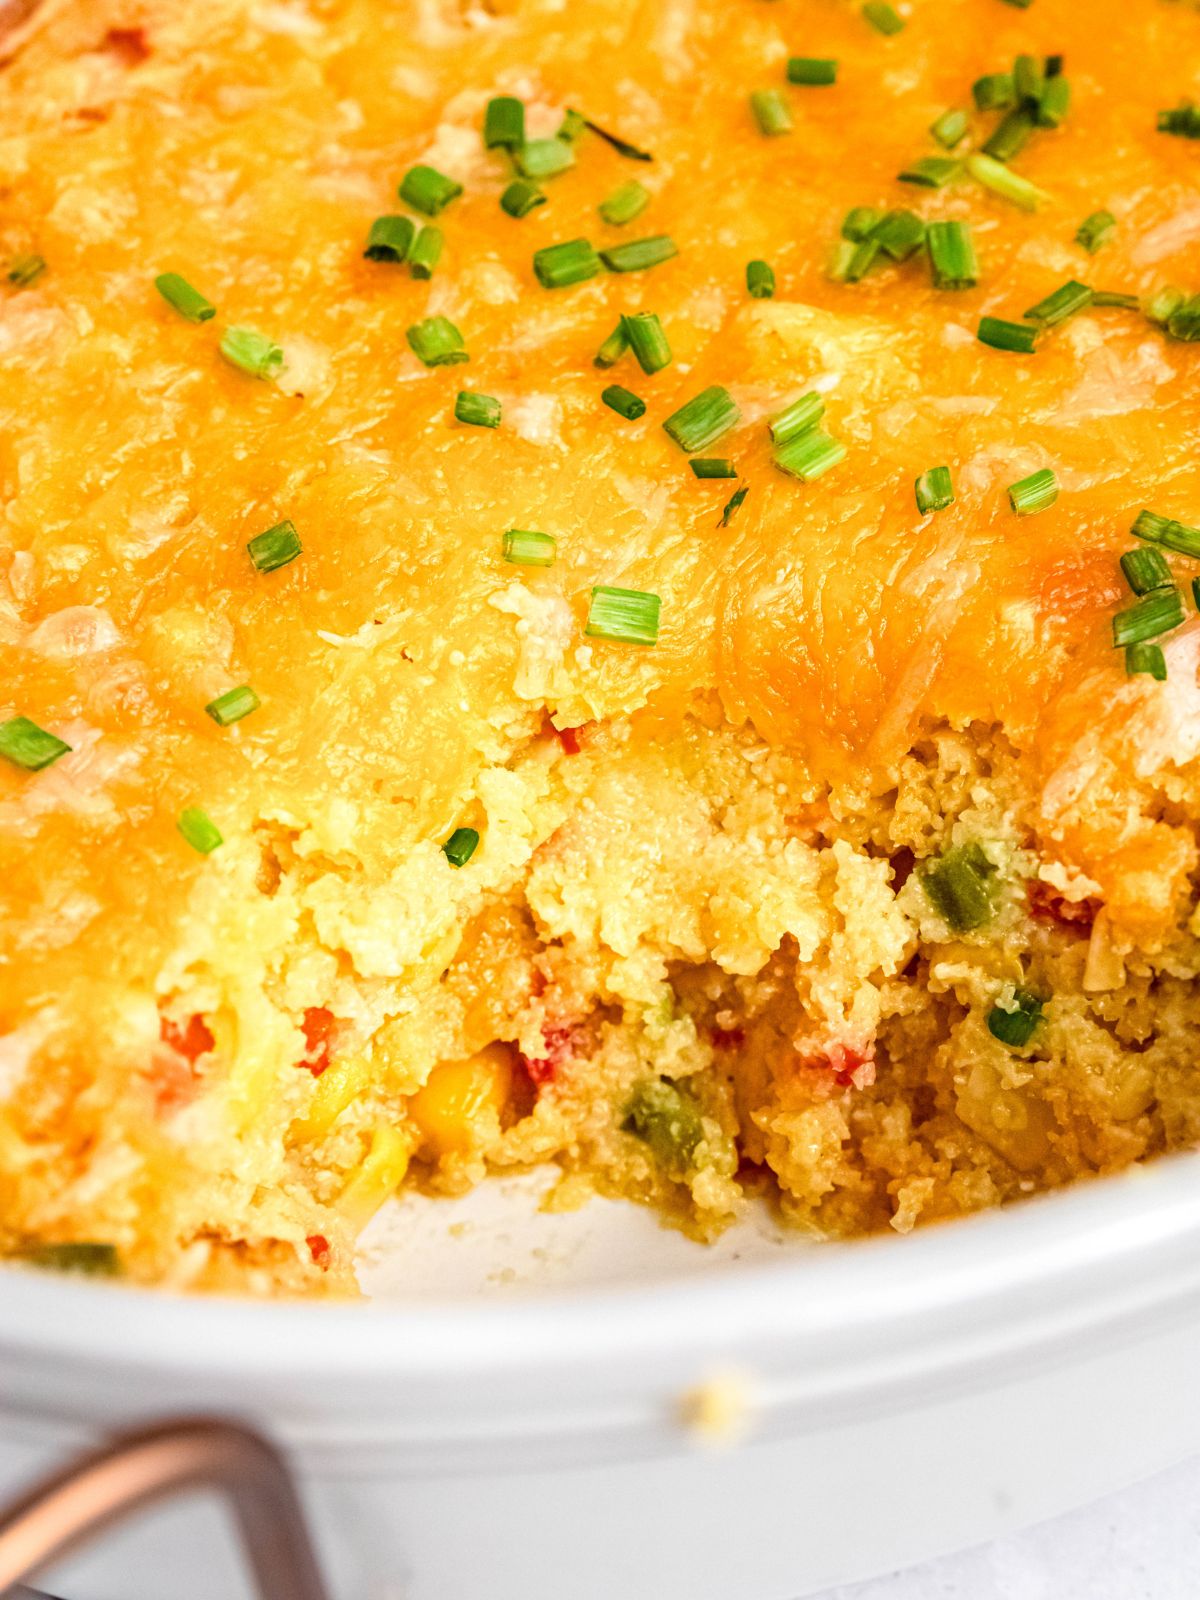 closeup shot of cheesy make-ahead healthy corn casserole in the baking pan with a scoop taken out so you can see the melty cheese layer and creamy, cornbread-like interior.